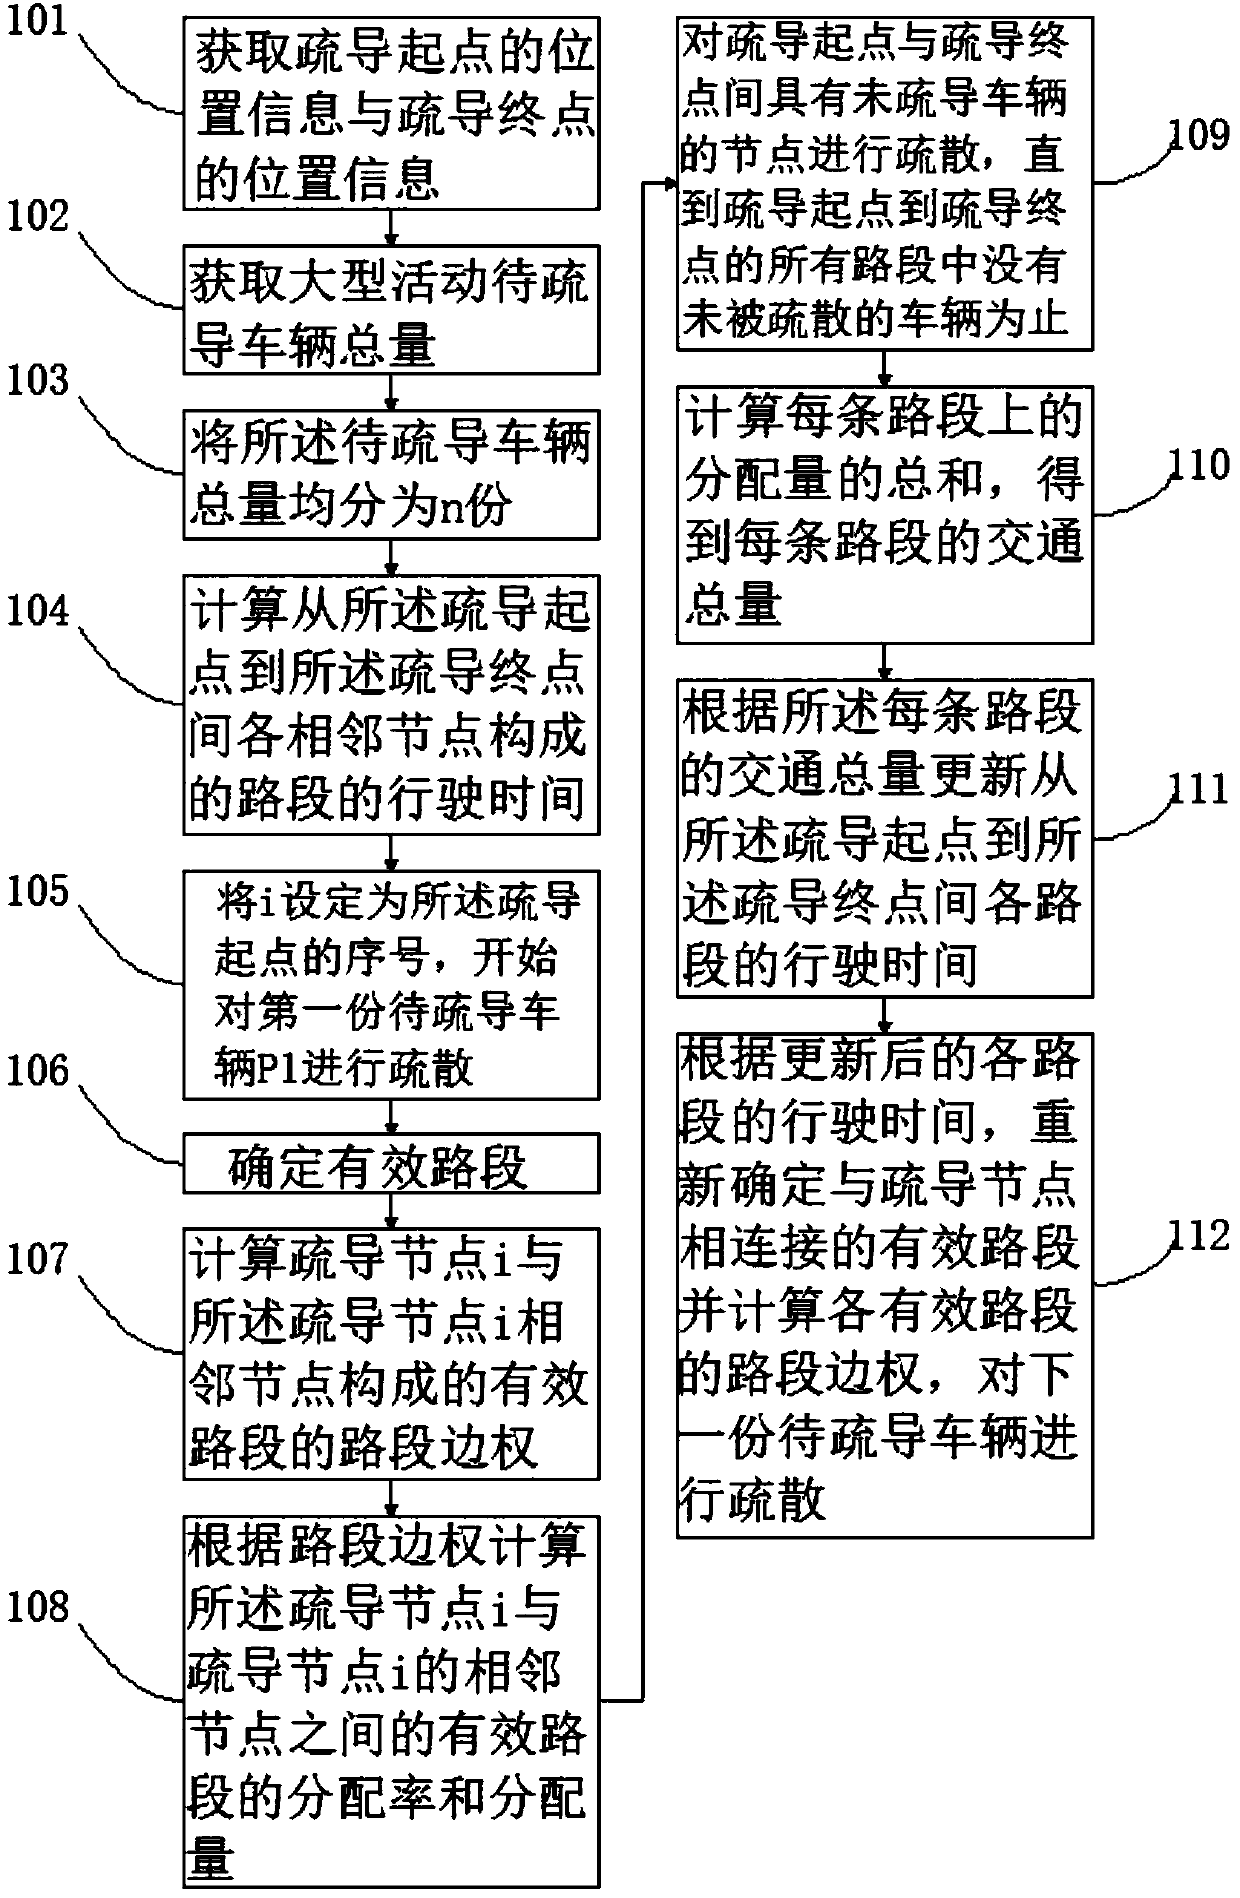 A large-scale event traffic control method and system